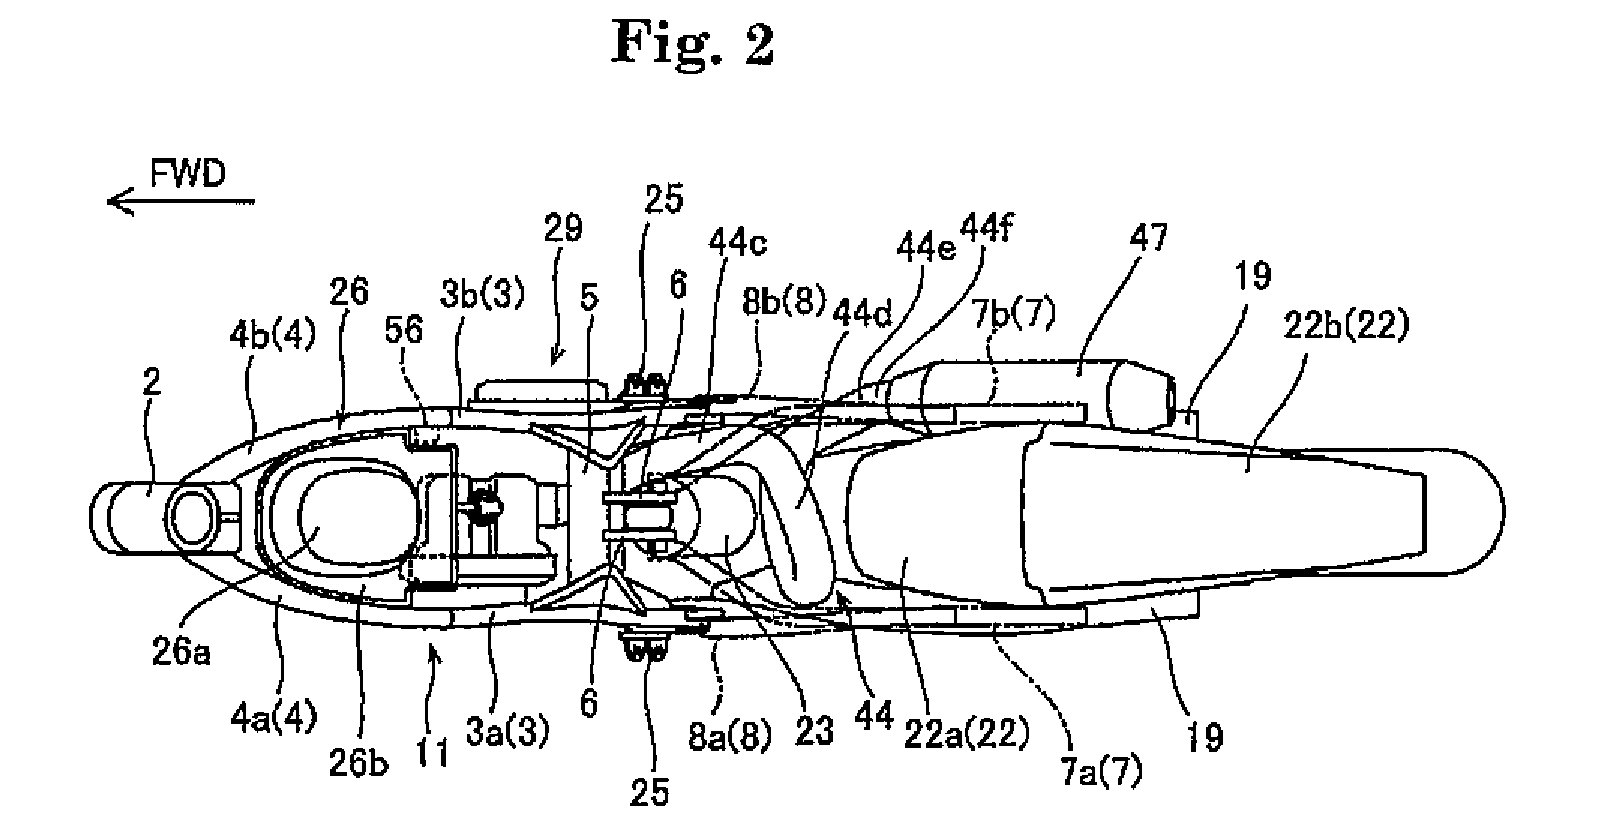 Relative configuration of an engine intake pipe for a motorcycle